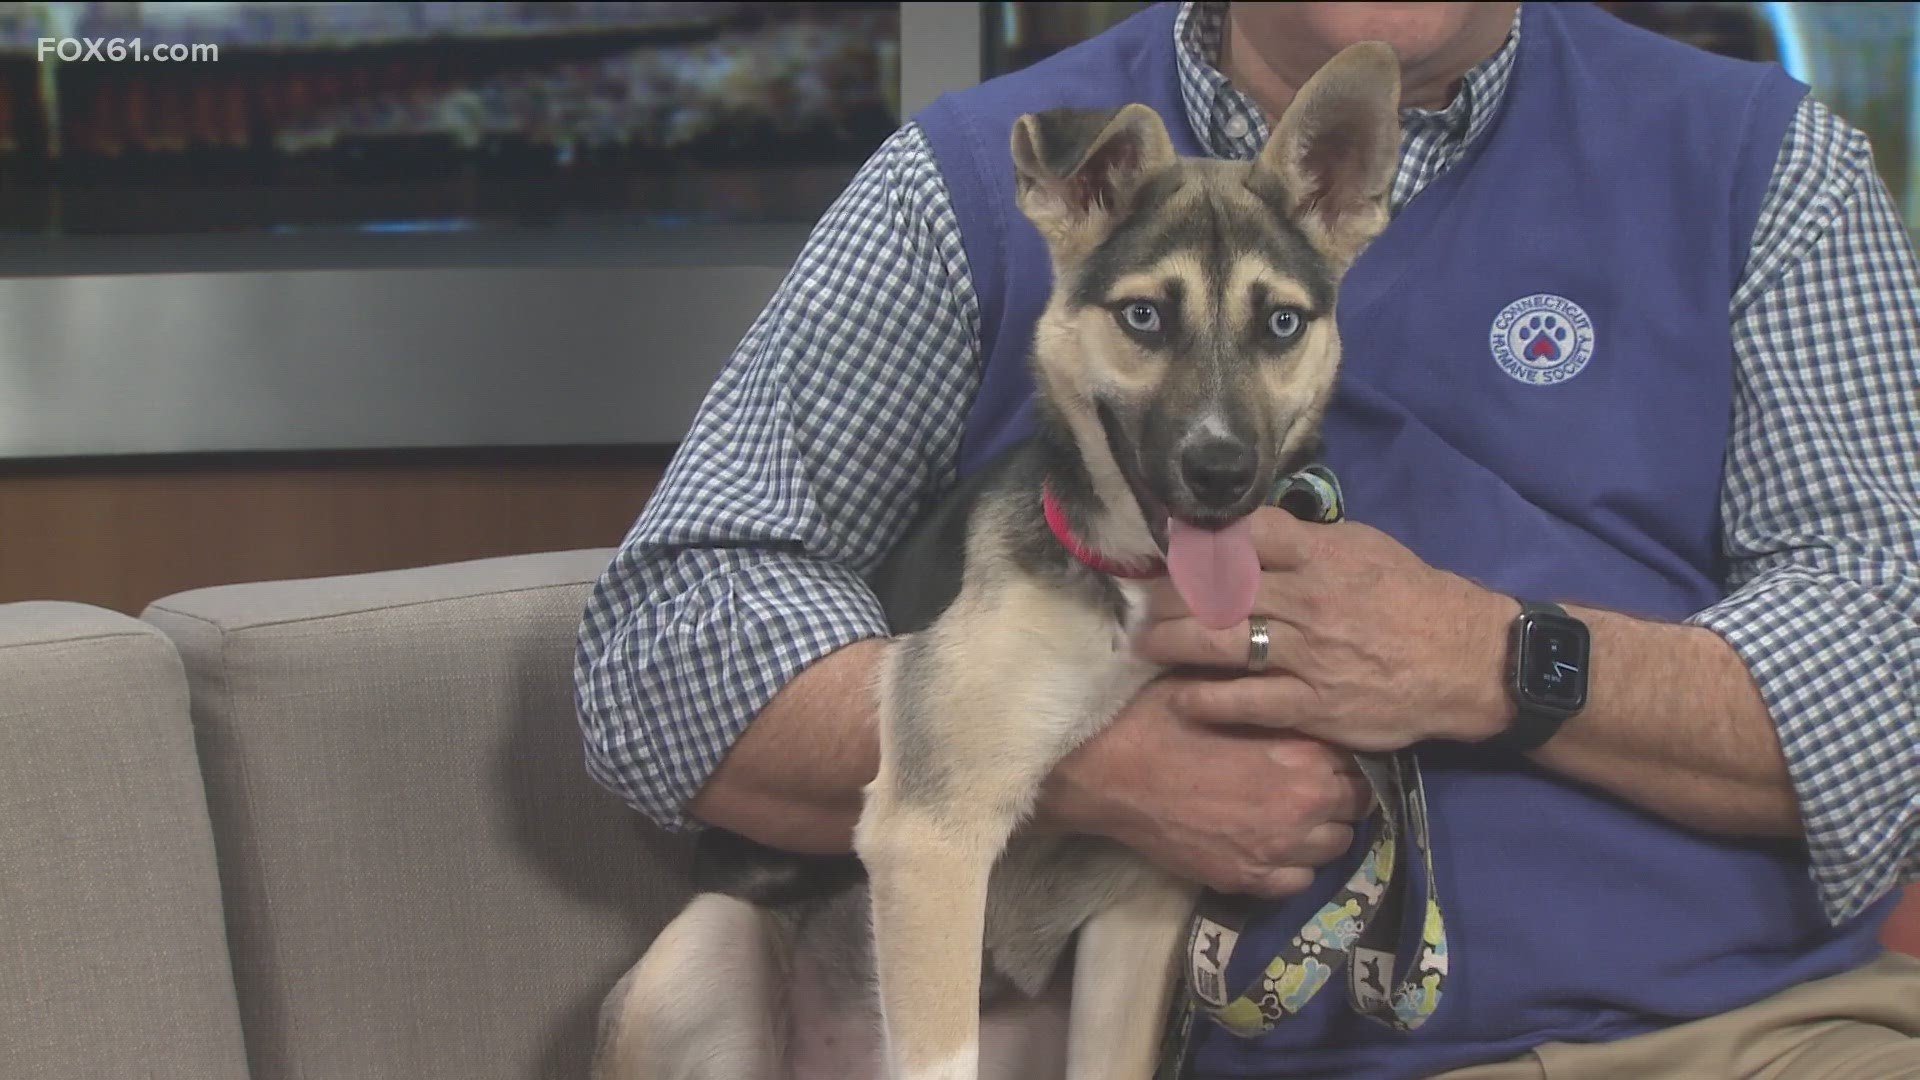 Callie is a 6-month-old spayed female Shepherd mix. She may be small now but will grow up to be a big dog. Callie is available for adoption at CT Humane.